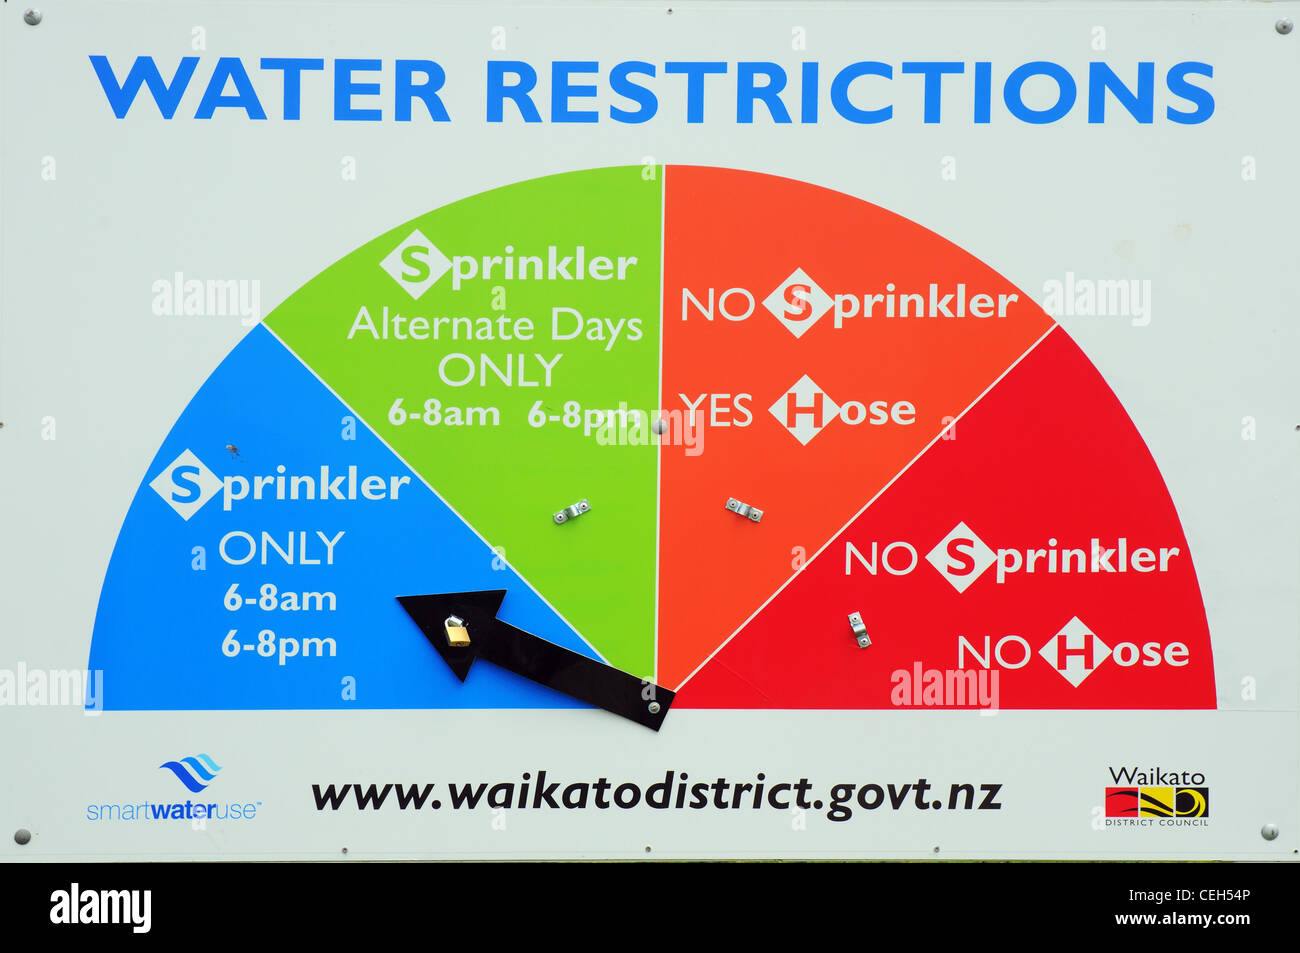 A water restrictions board in New Zealand, showing whether you can use sprinklers or hoses Stock Photo